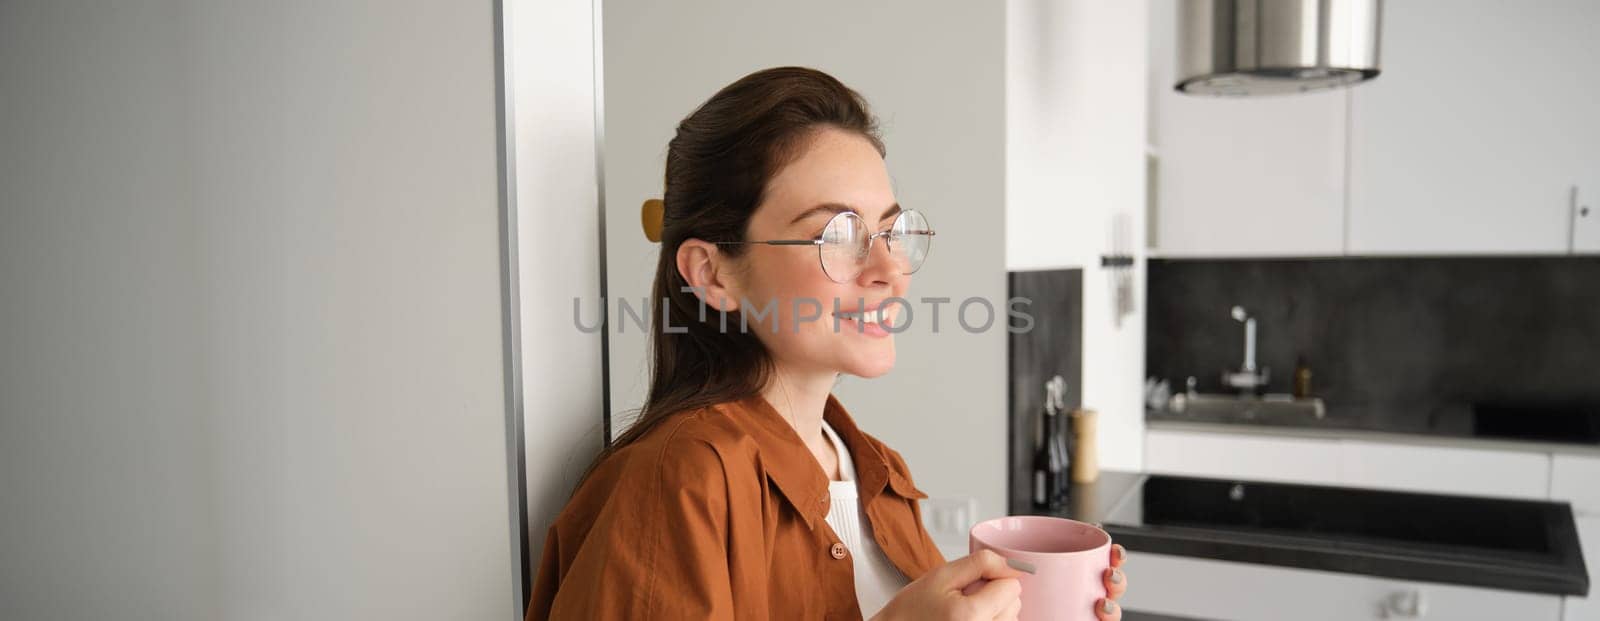 Portrait of happy young woman at home, holding cup of tea, leaning on wall, smiling, drinking coffee from pink mug.